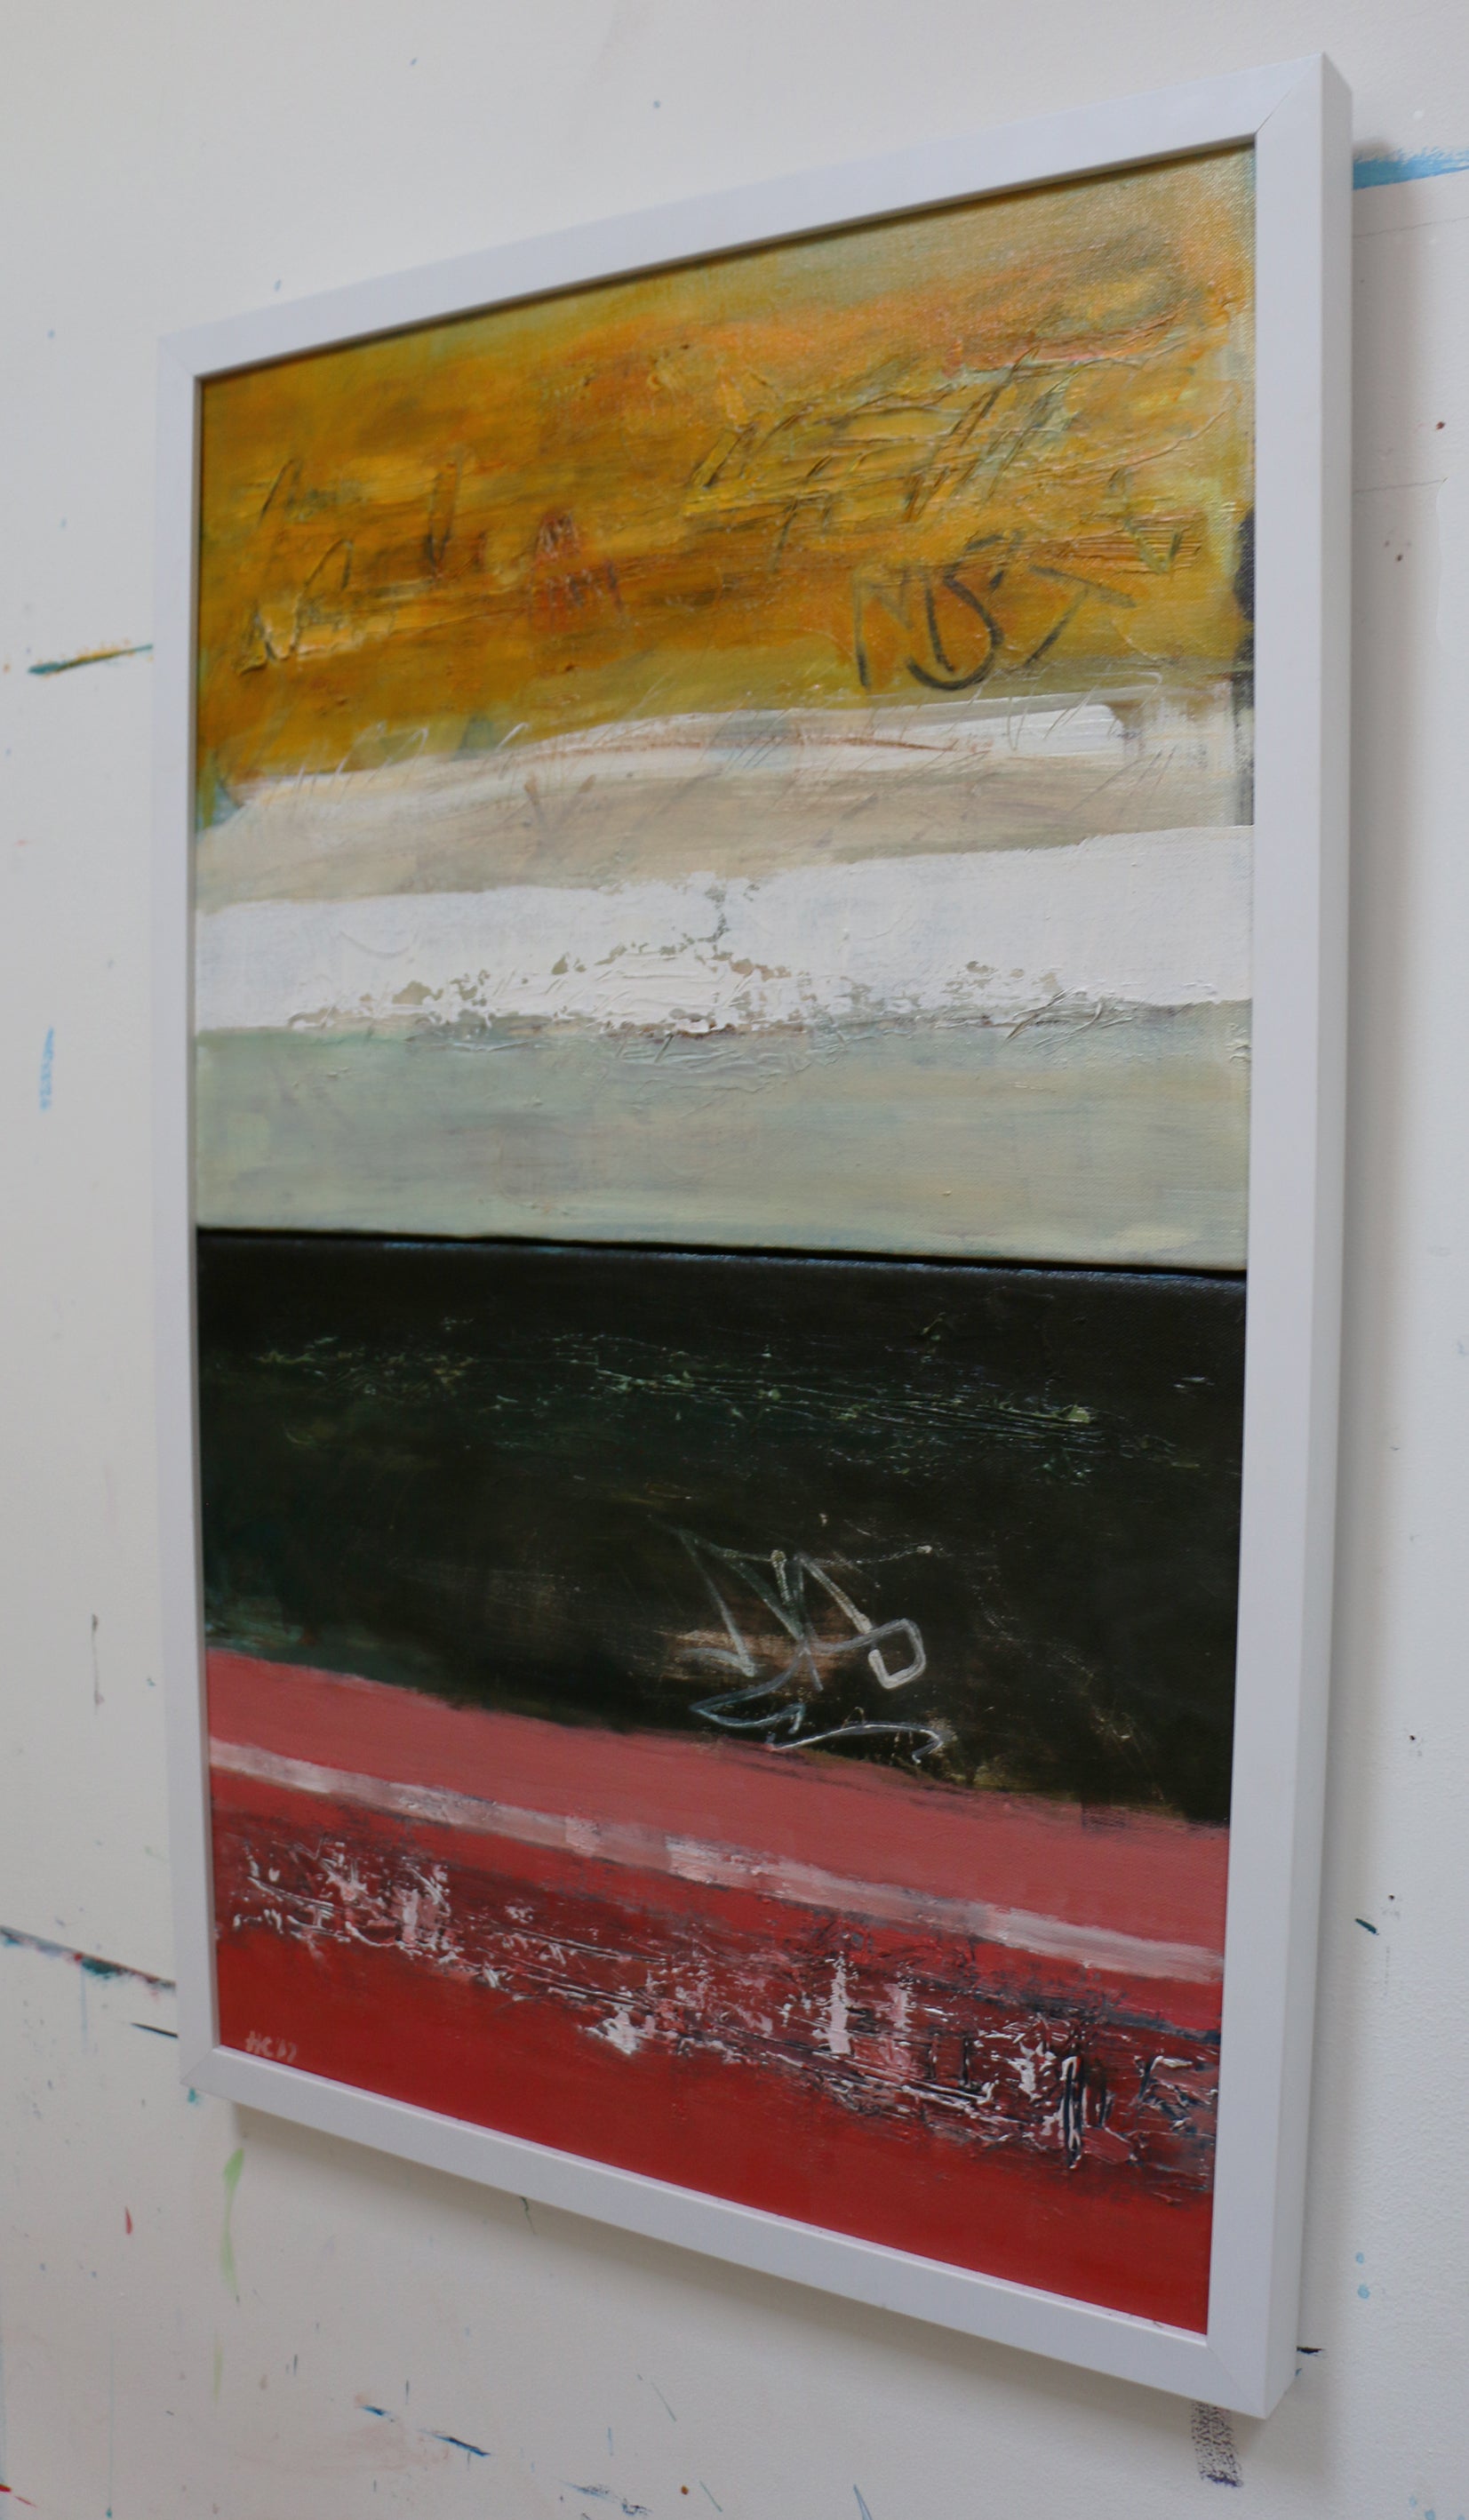 The painting "Street Diptych" seen from a right side angle that shows the depth of a frame.